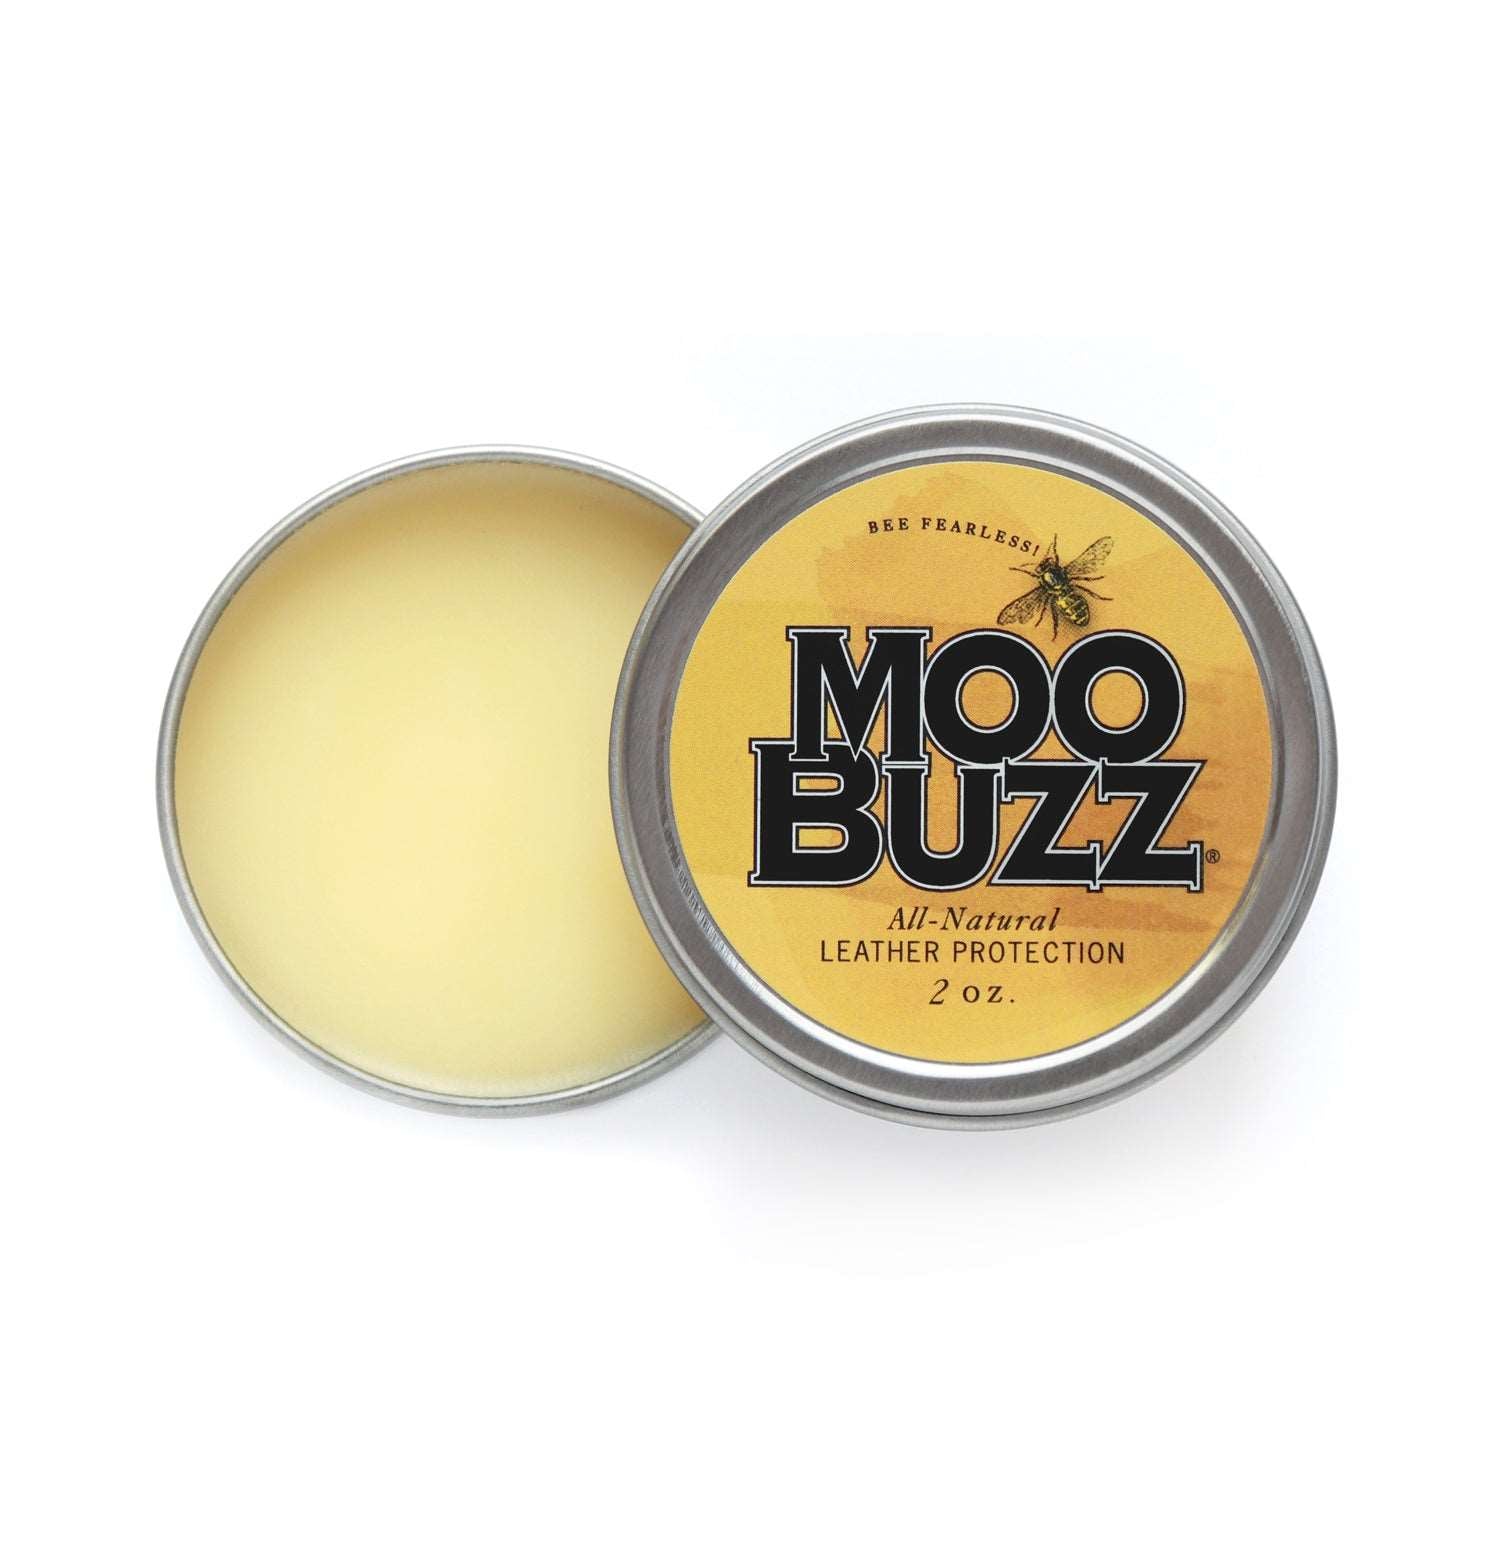 Open travel size tin with MooBuzz all-natural leather protection